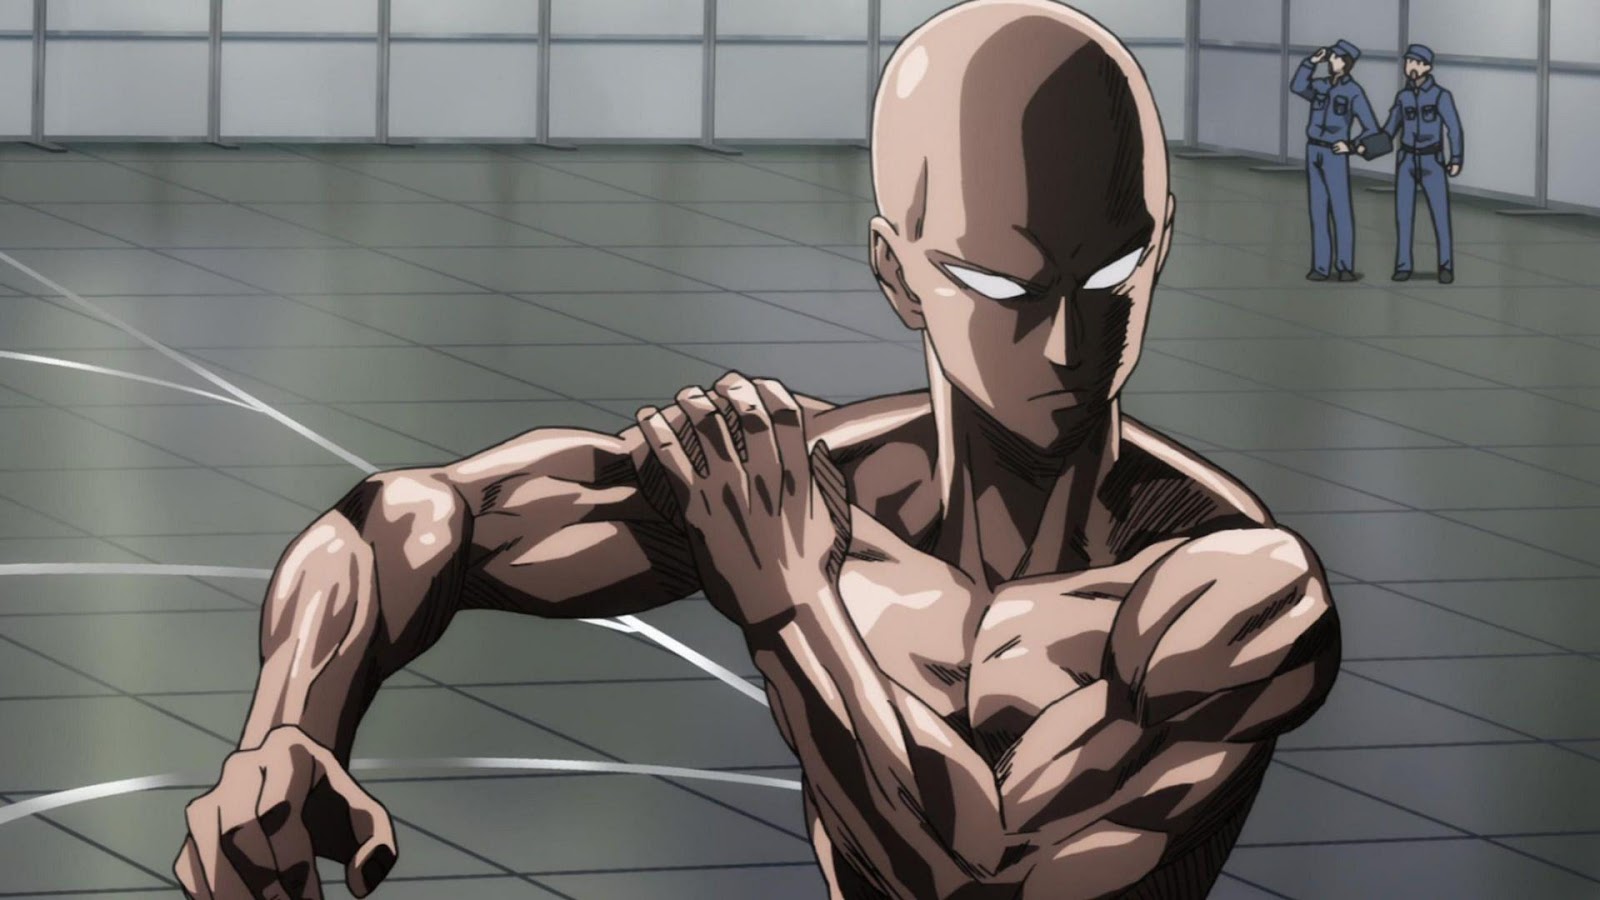 Has Saitama ever used his full power in One Punch Man?